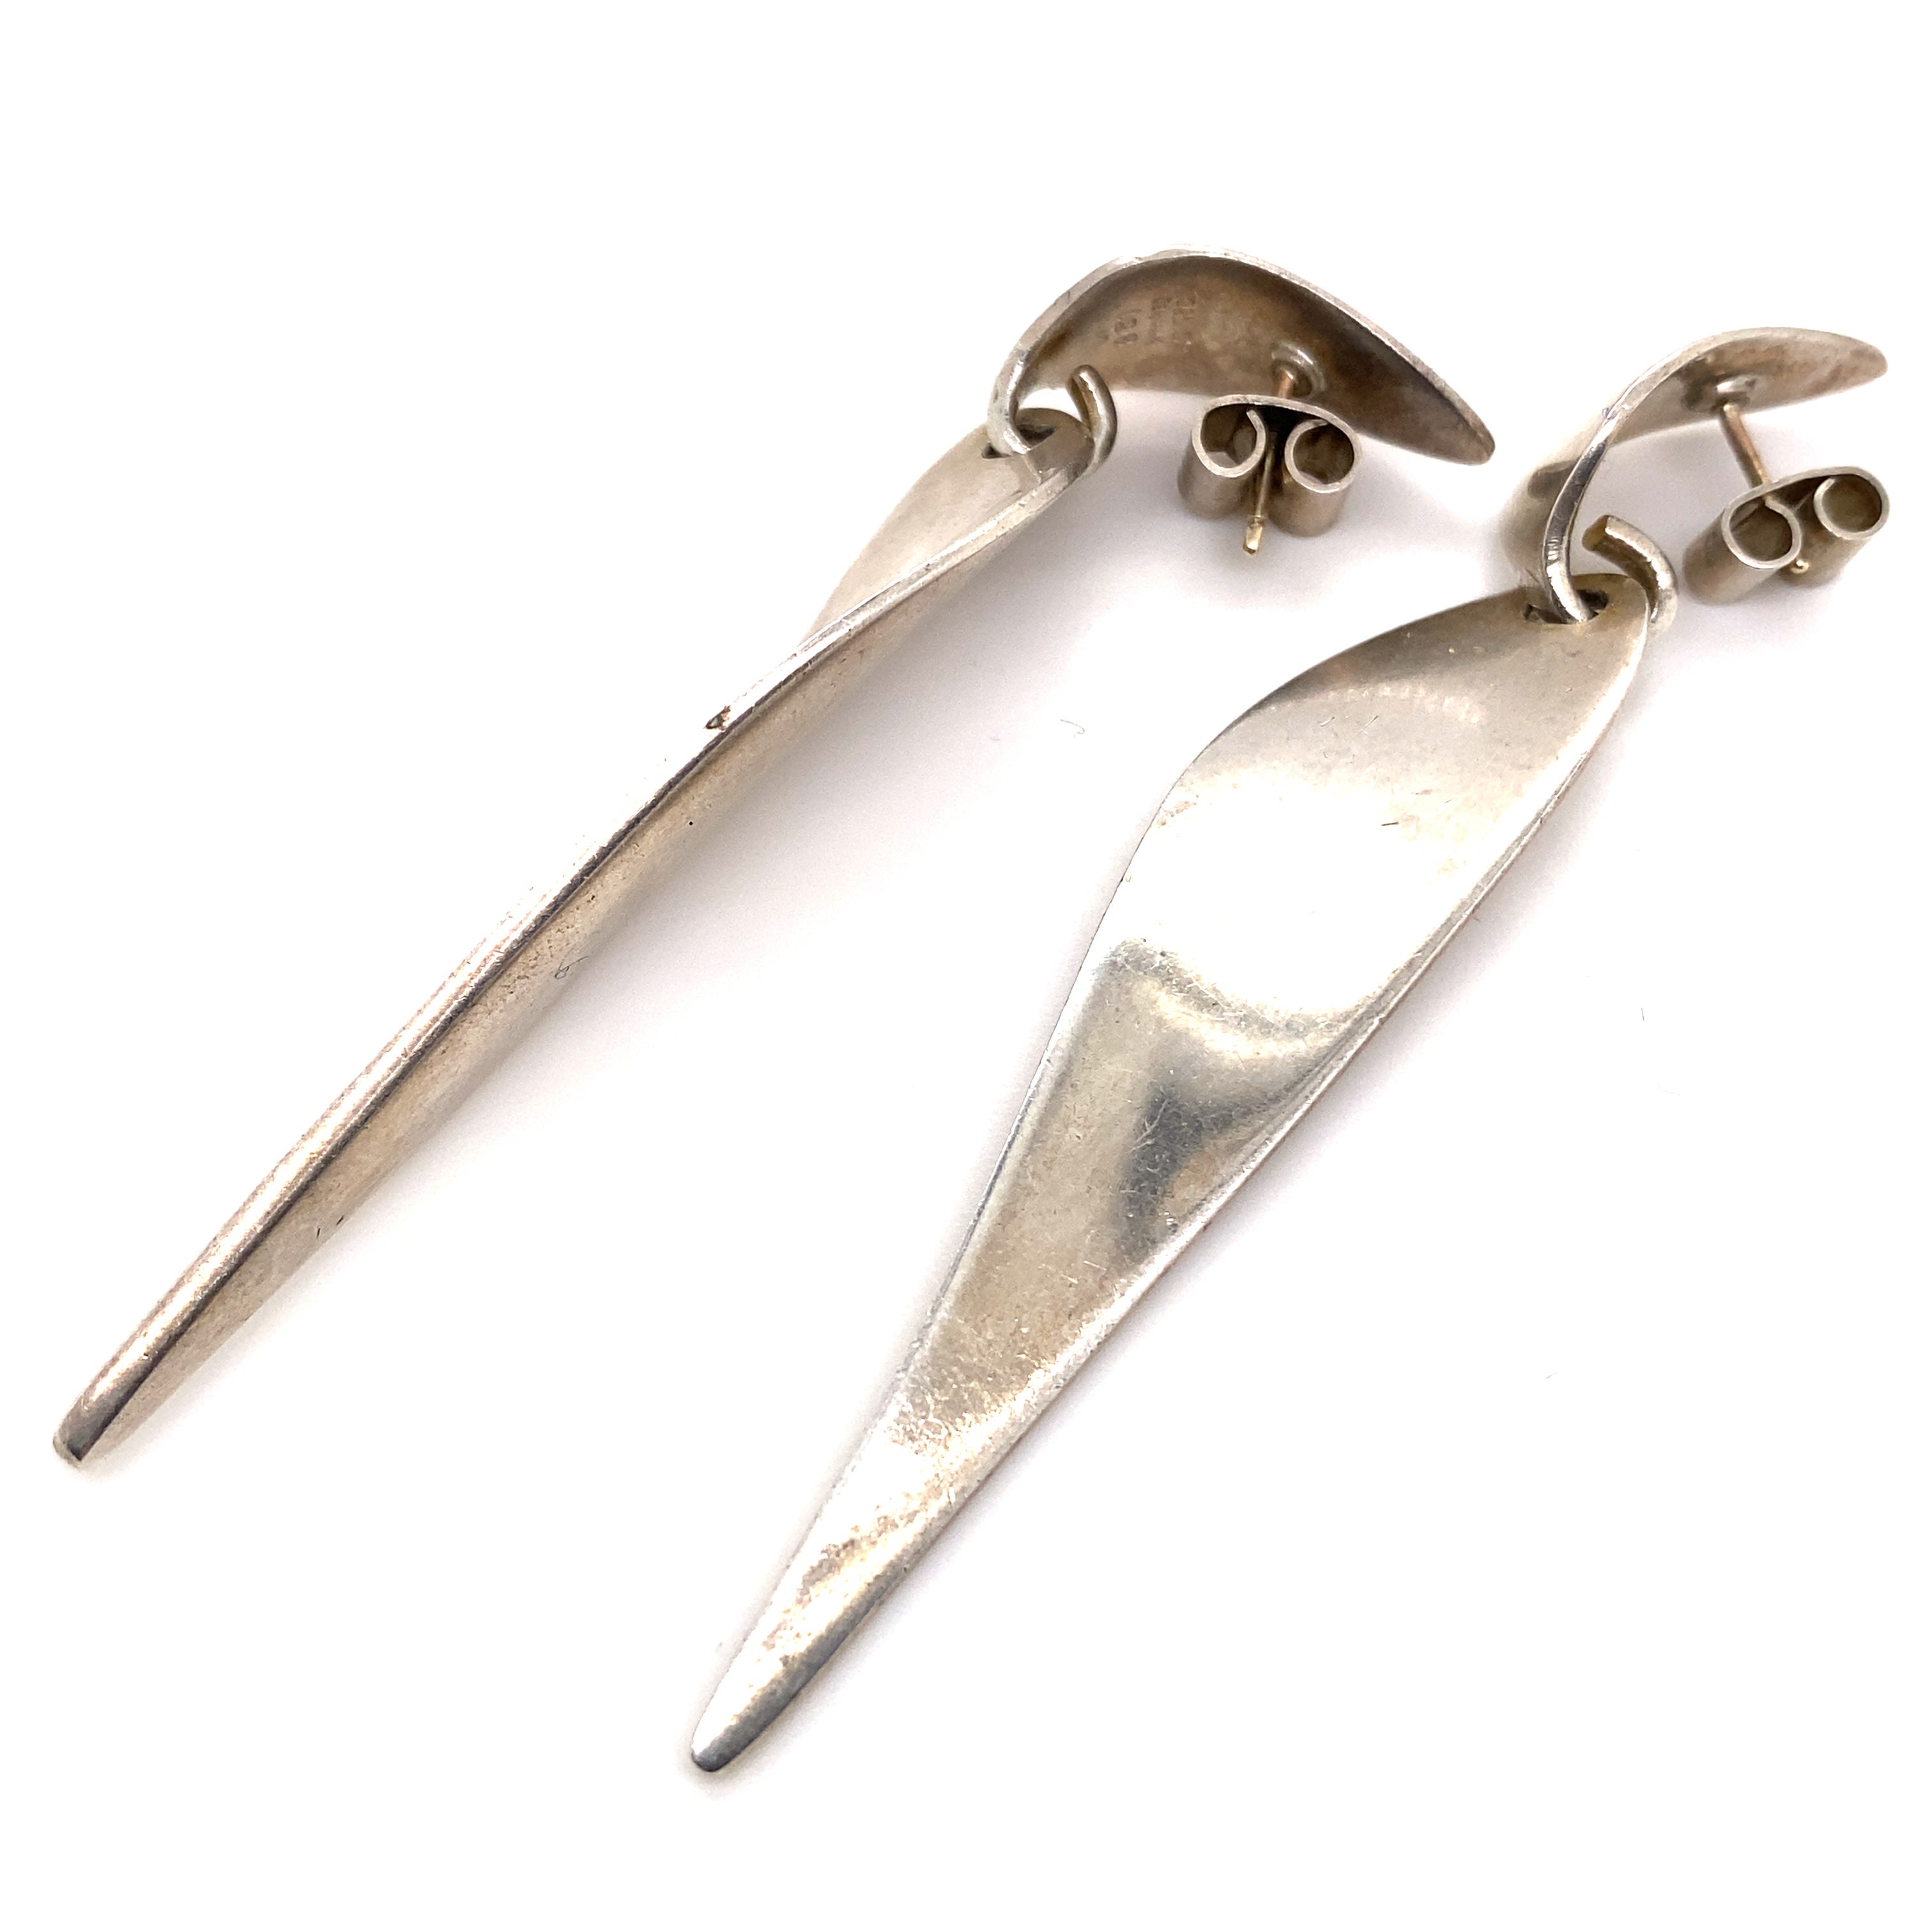 A pair of Nanna Ditzel for Georg Jensen sterling silver no 128a drop earrings, circa 1968

Comprised of an elegant oval tear drop atop a curved and undulating silver shard, the two components are perfectly articulated and follow the line of the neck